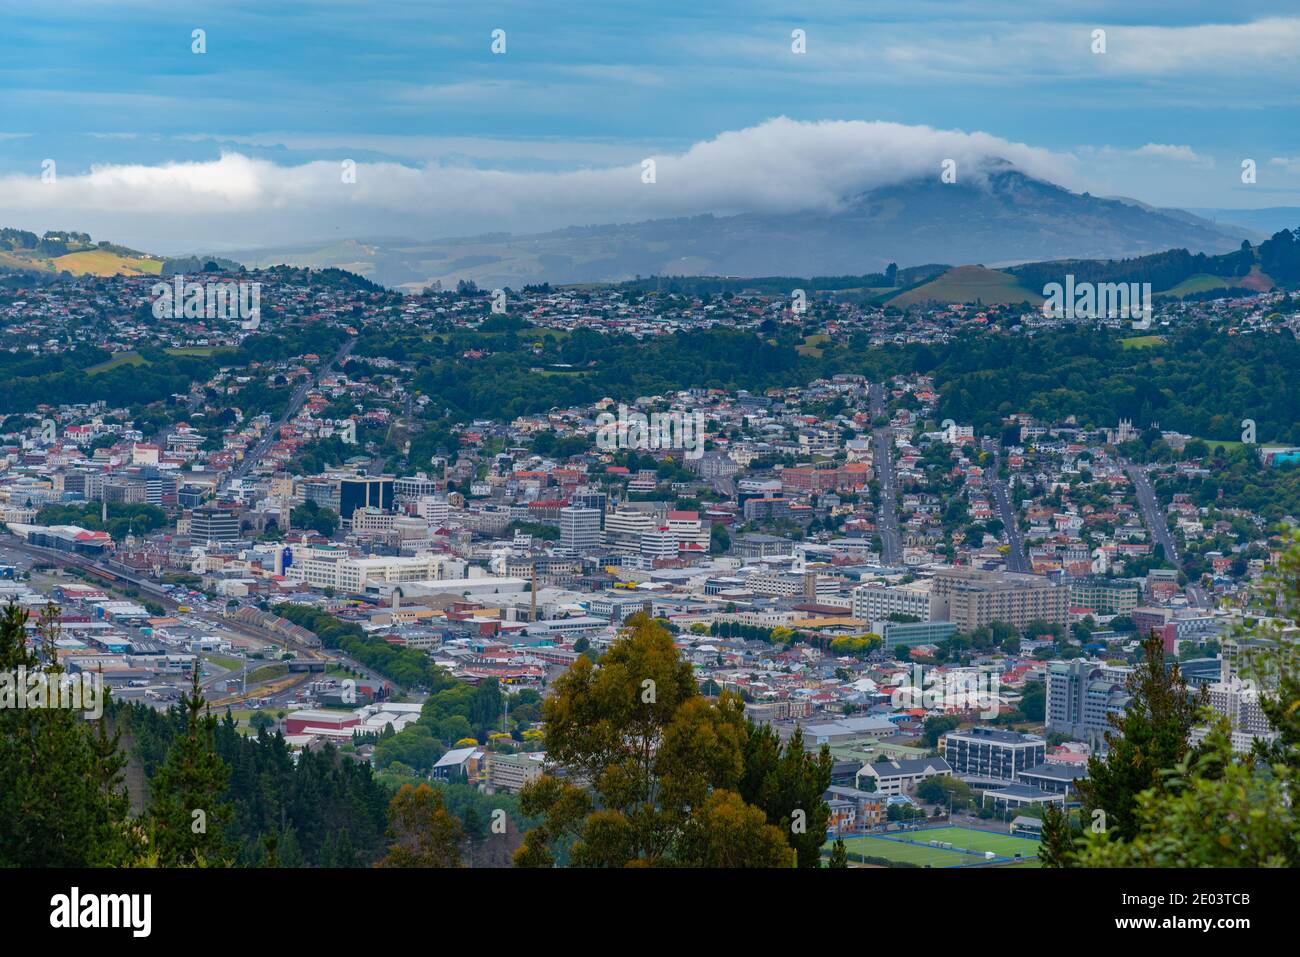 Aerial view of downtown Dunedin, New Zealand Stock Photo